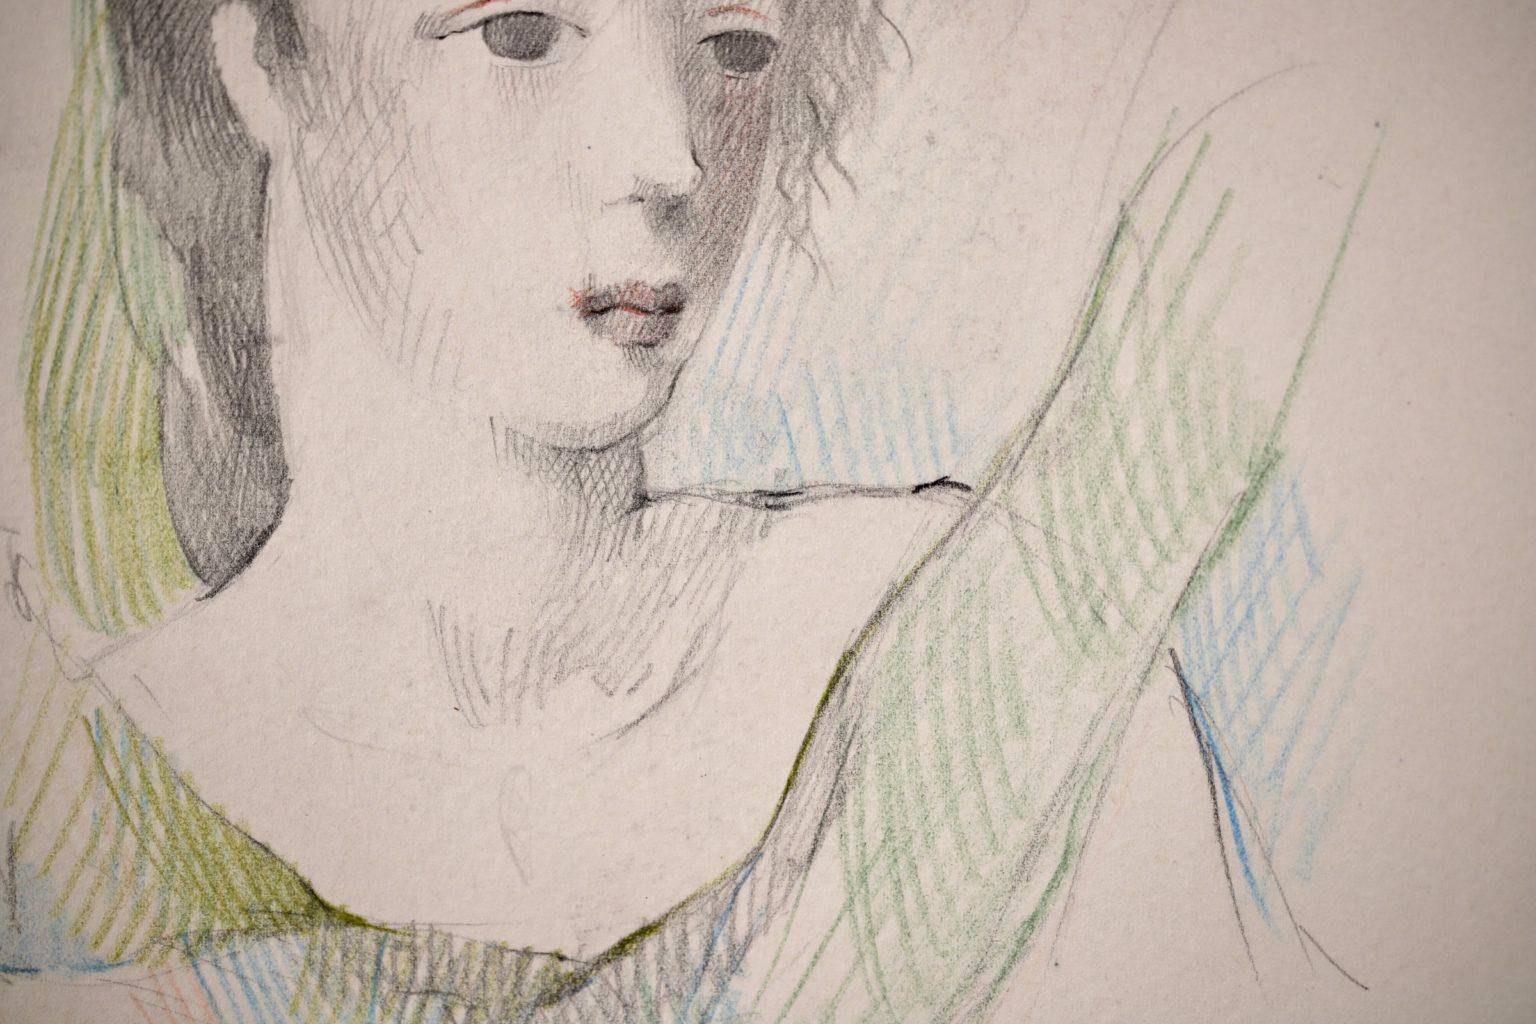 A beautiful and elegant portrait drawing of a young woman circa 1920 by French artist Marie Laurencin. The subject has her hair tied back and has a scarf flowing across her chest and behind her back. The work has been draw in coloured pencils - the